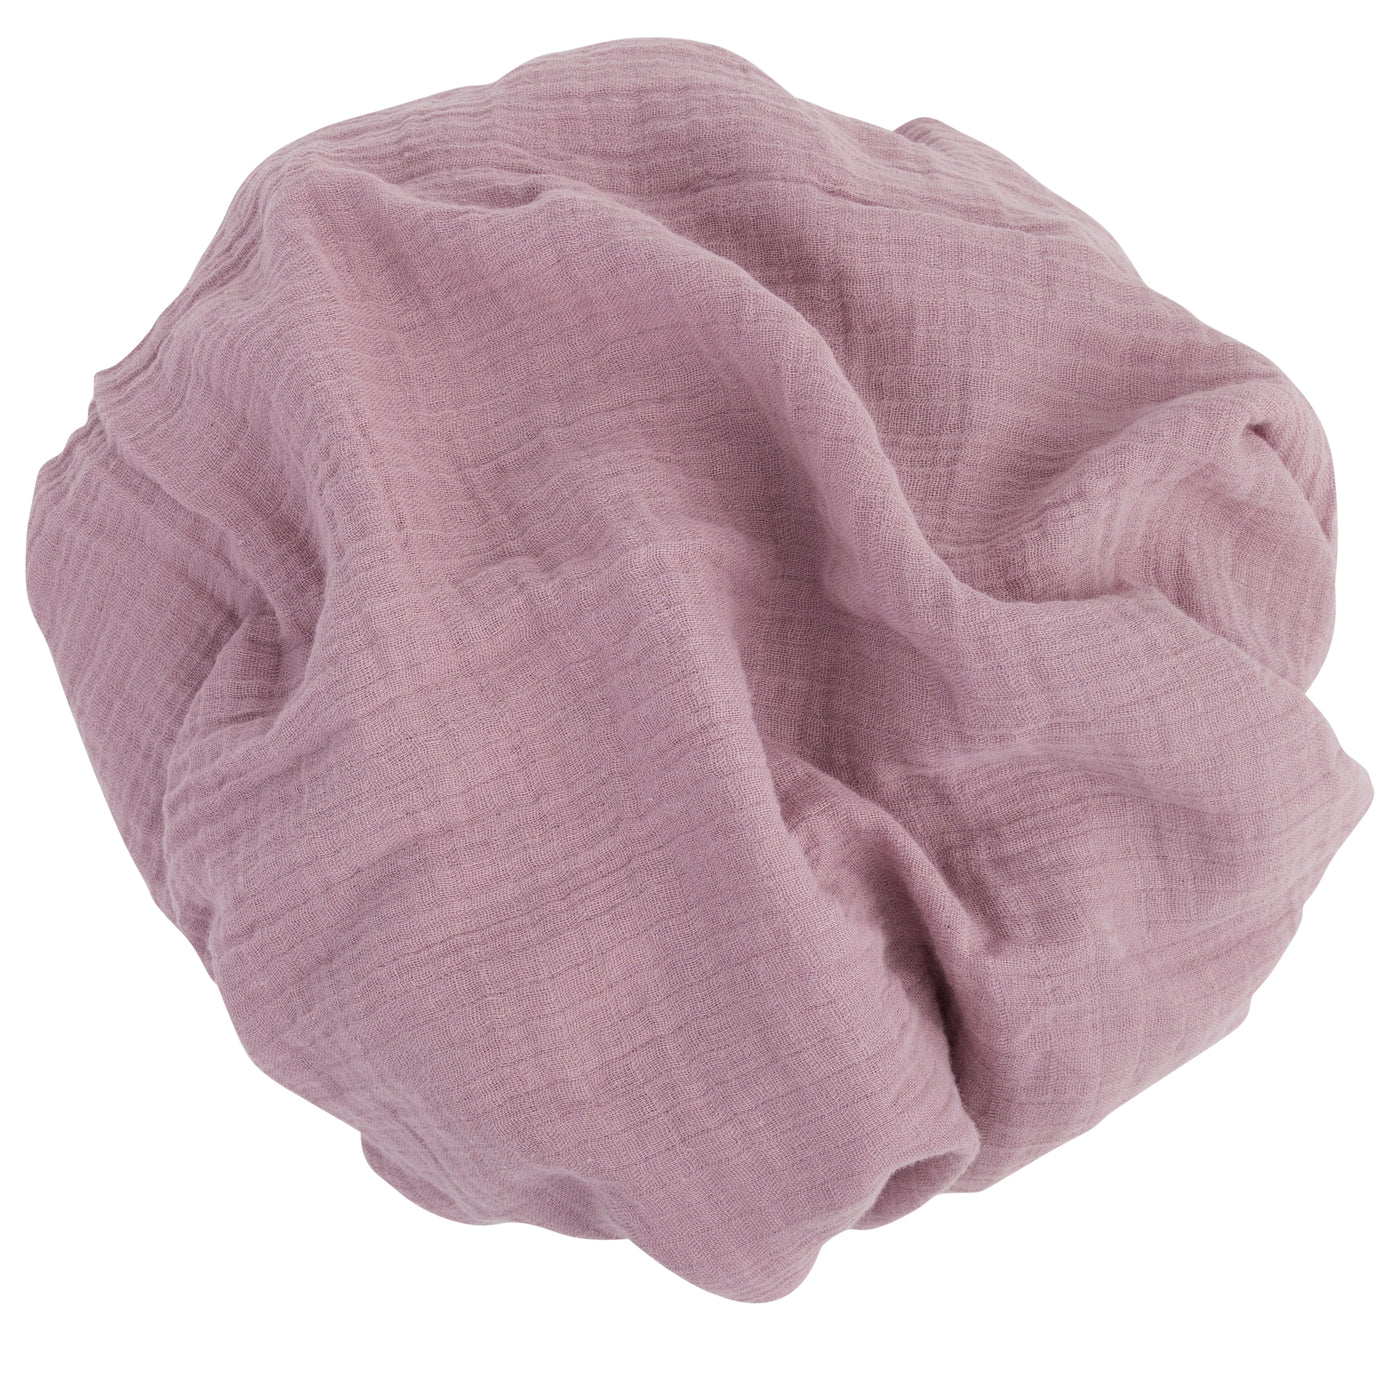 Ely's & Co. Muslin Swaddle Two Pack - Lavender Leaves Collection